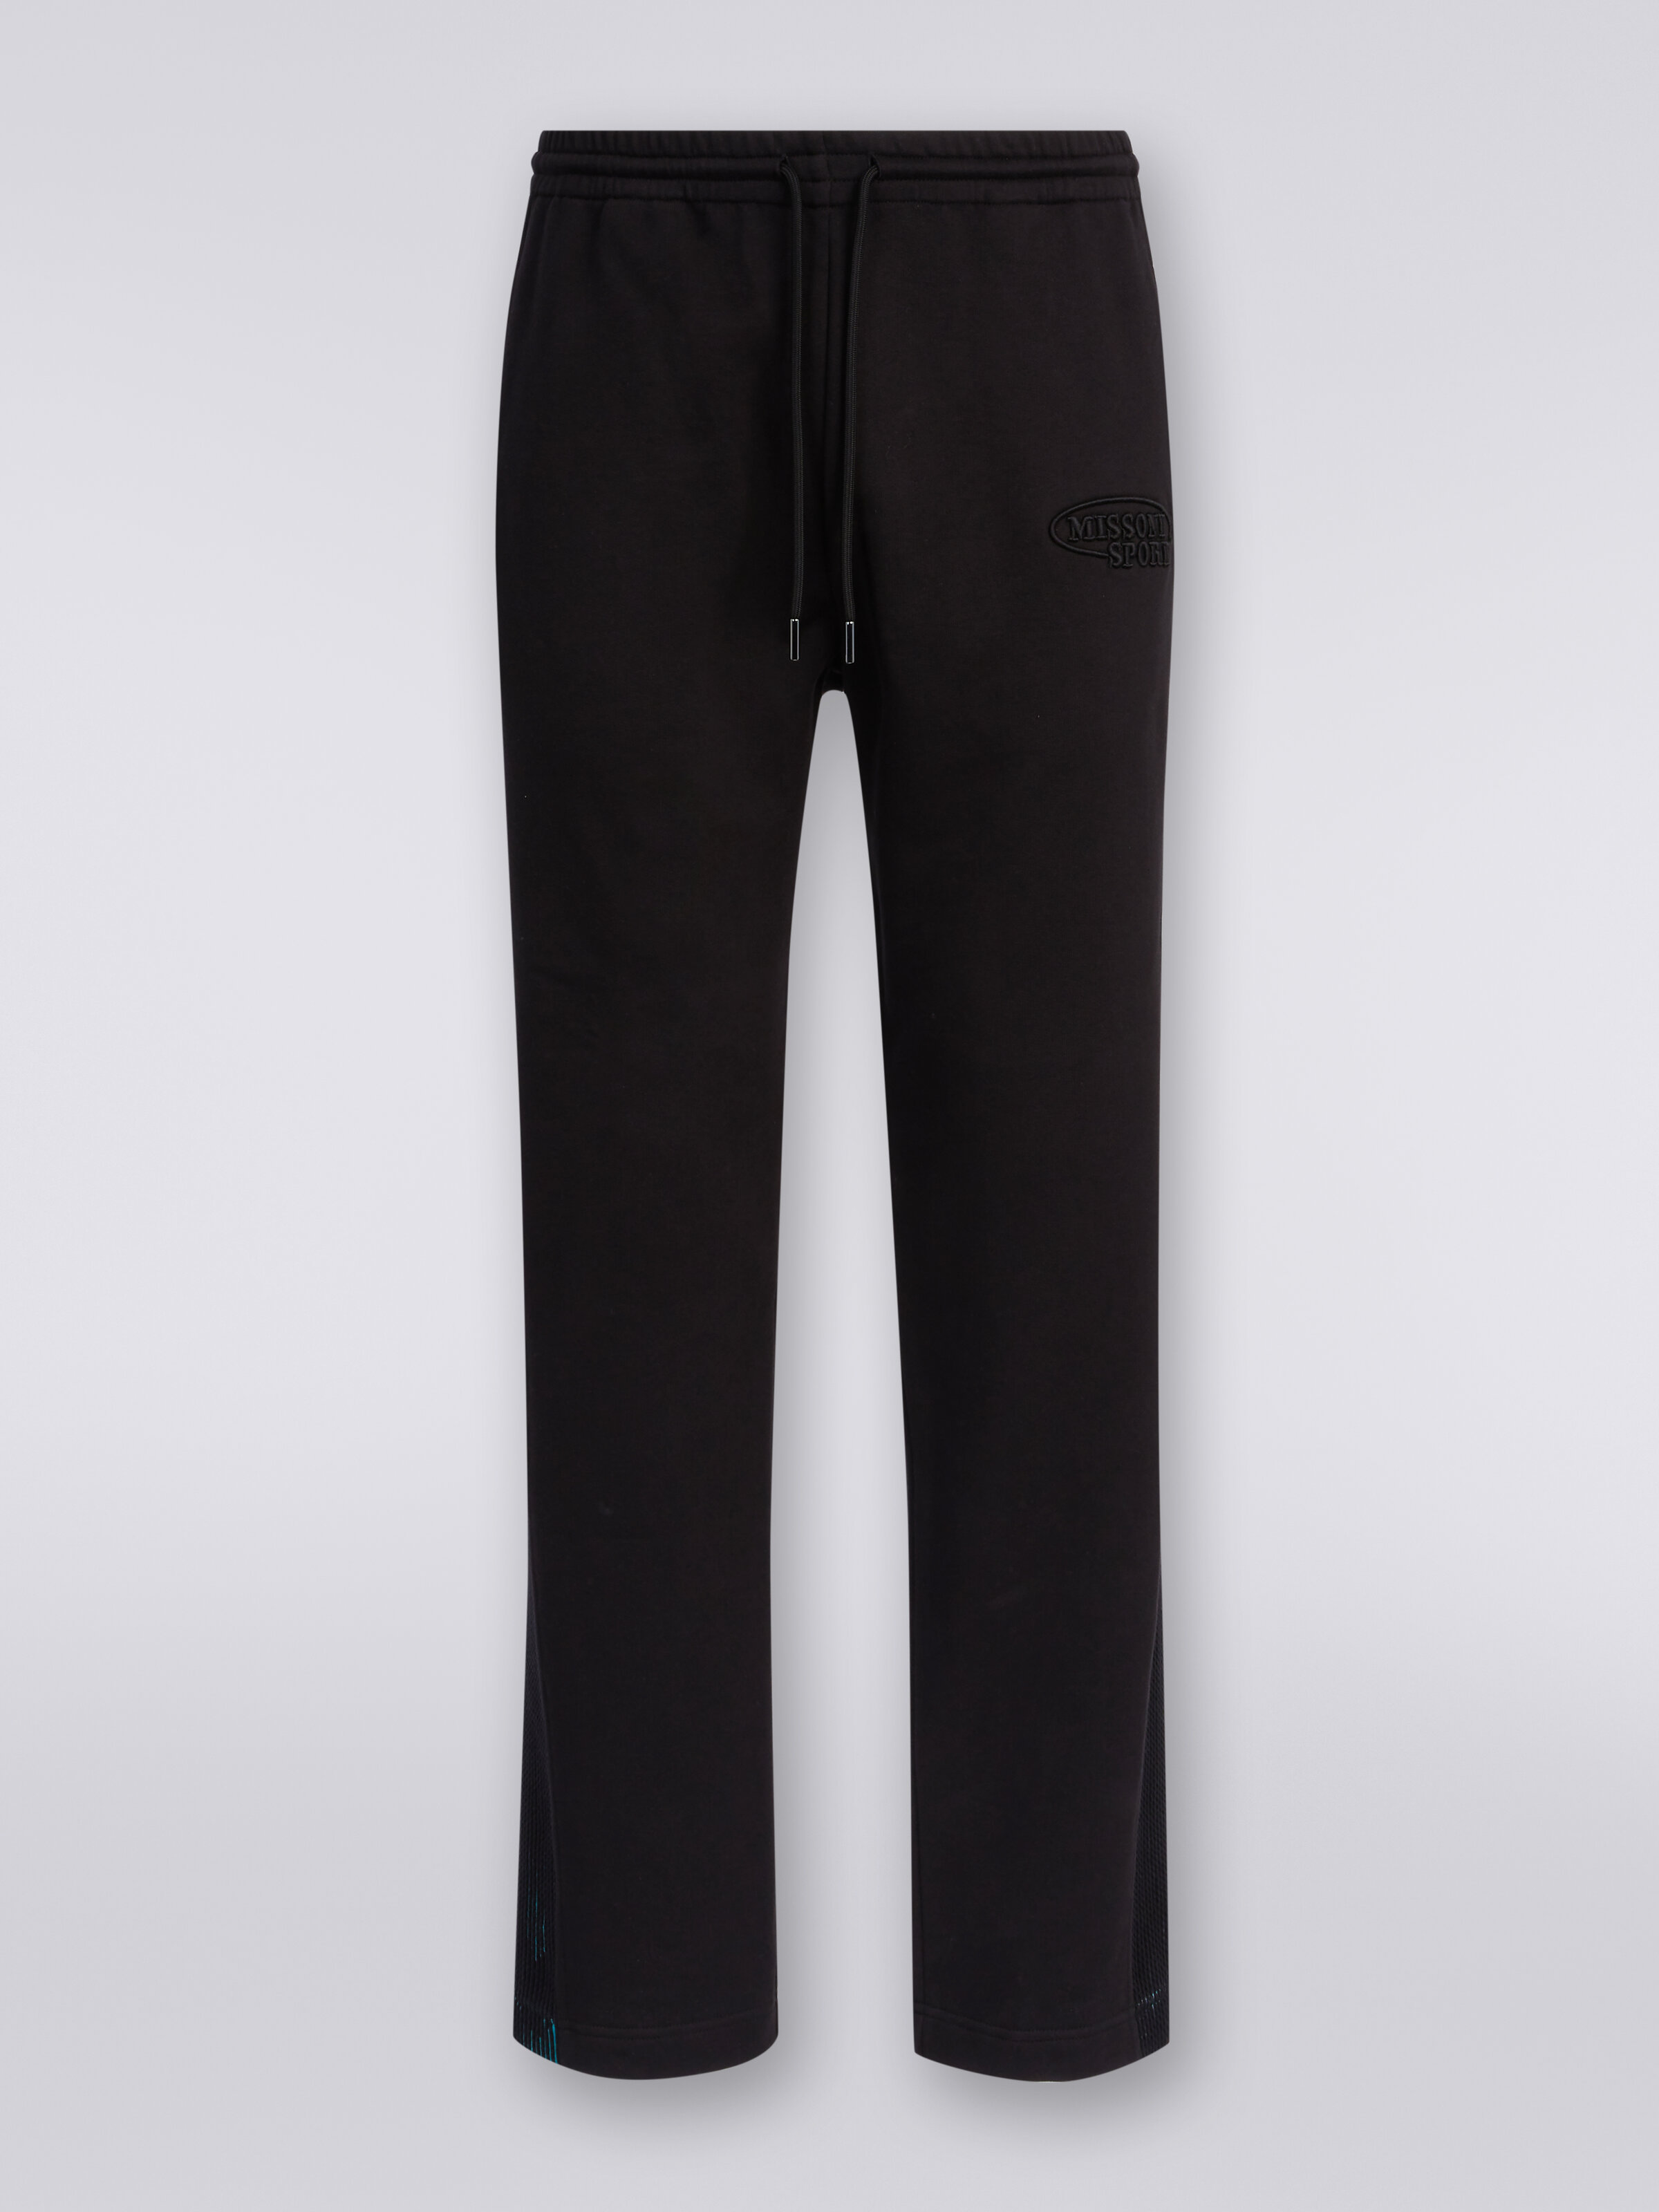 Trousers in fleece with logo and knitted side bands, Black    - 0